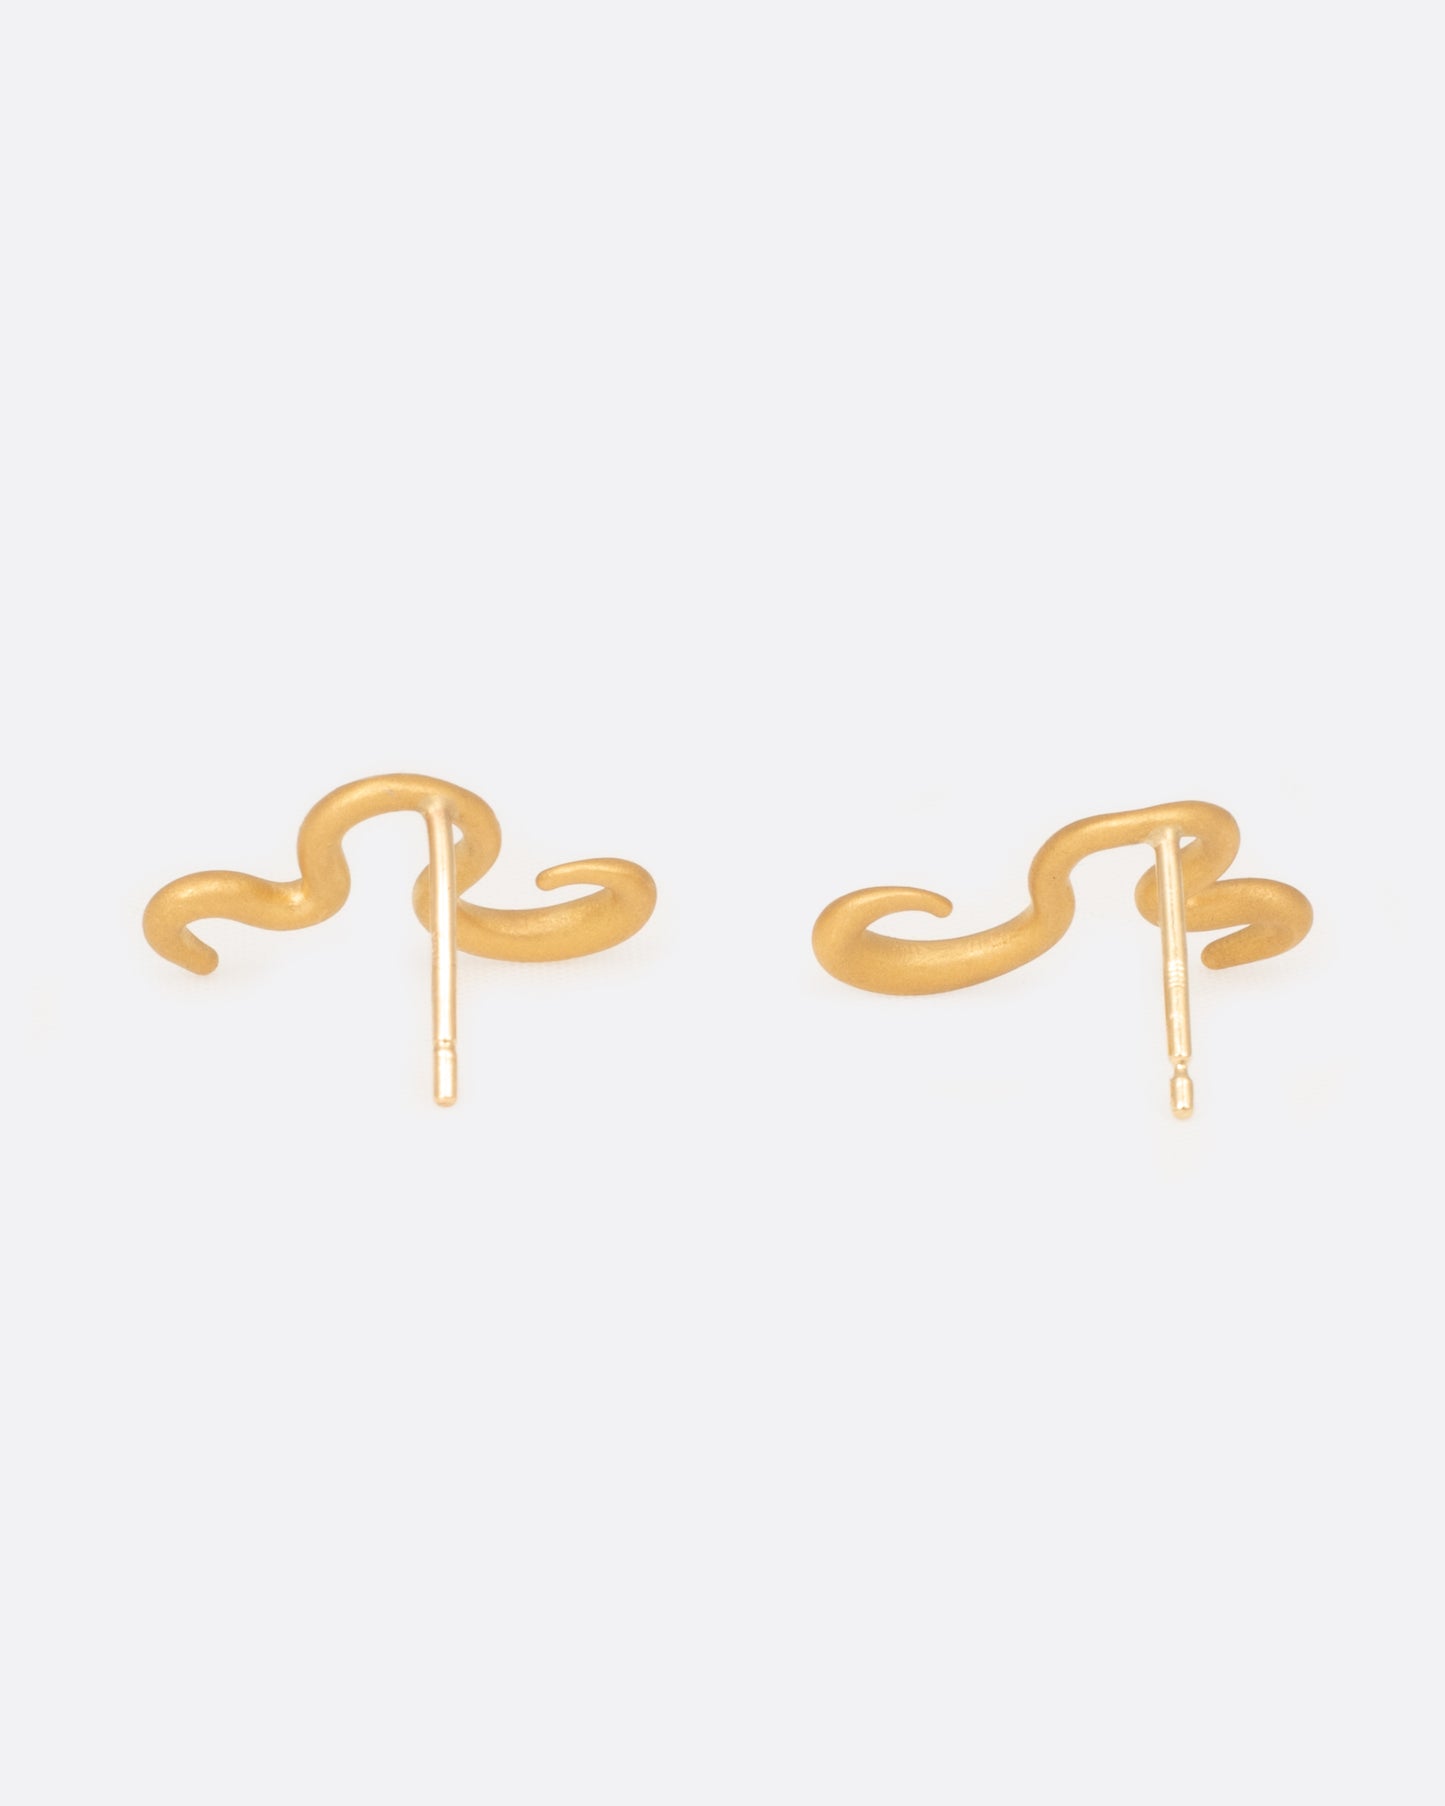 Curved 22k yellow gold snake stud earrings, shown from the back.